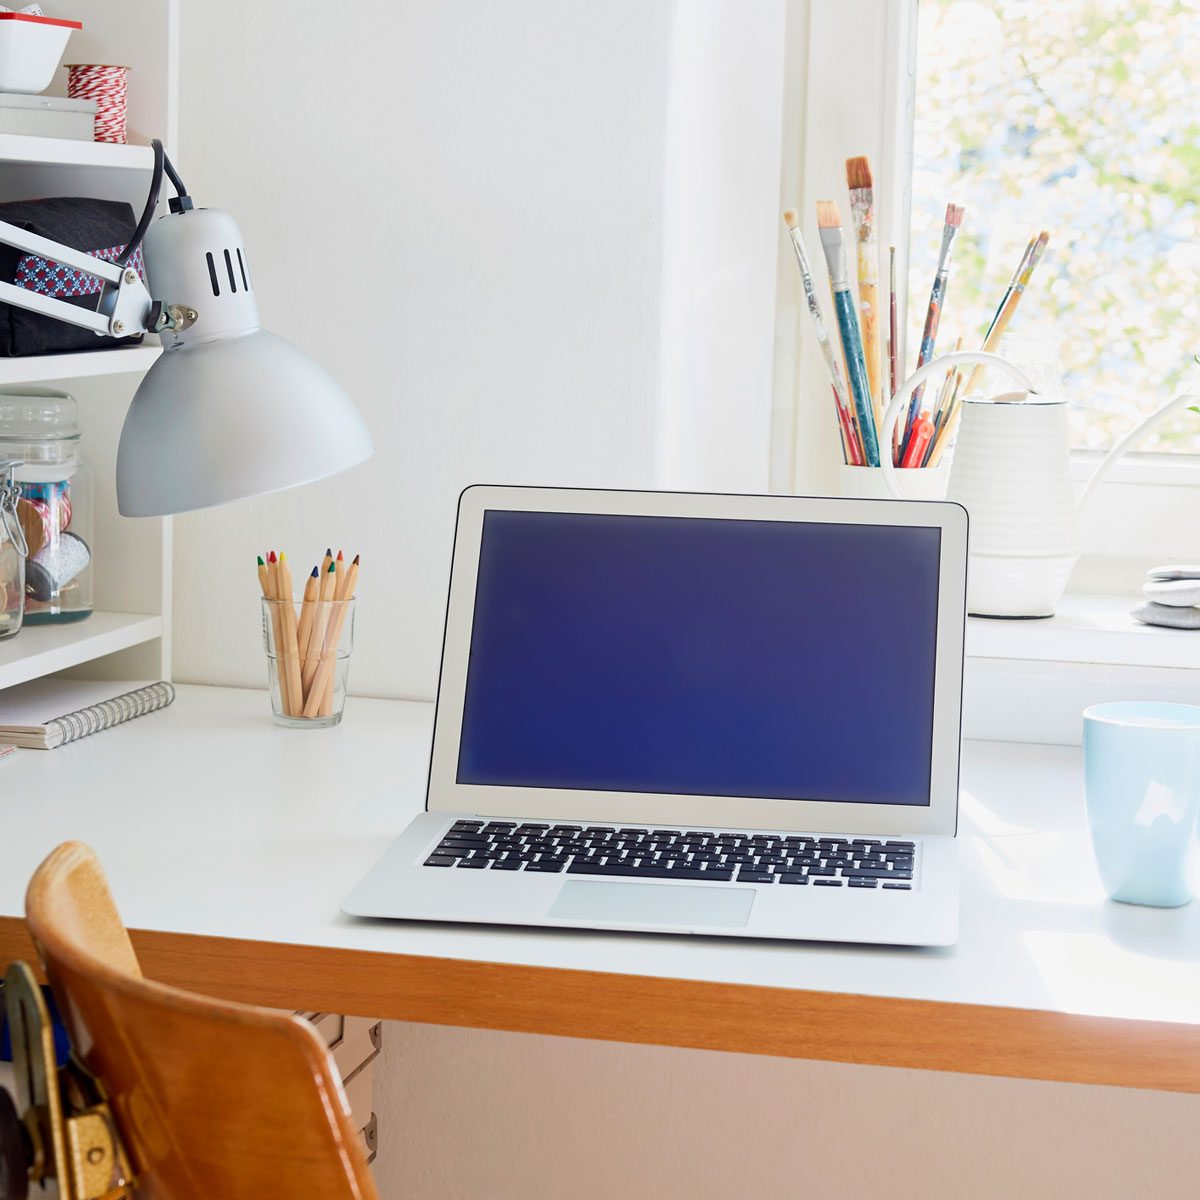 4 Organization Tips for Your Desk & Home Office